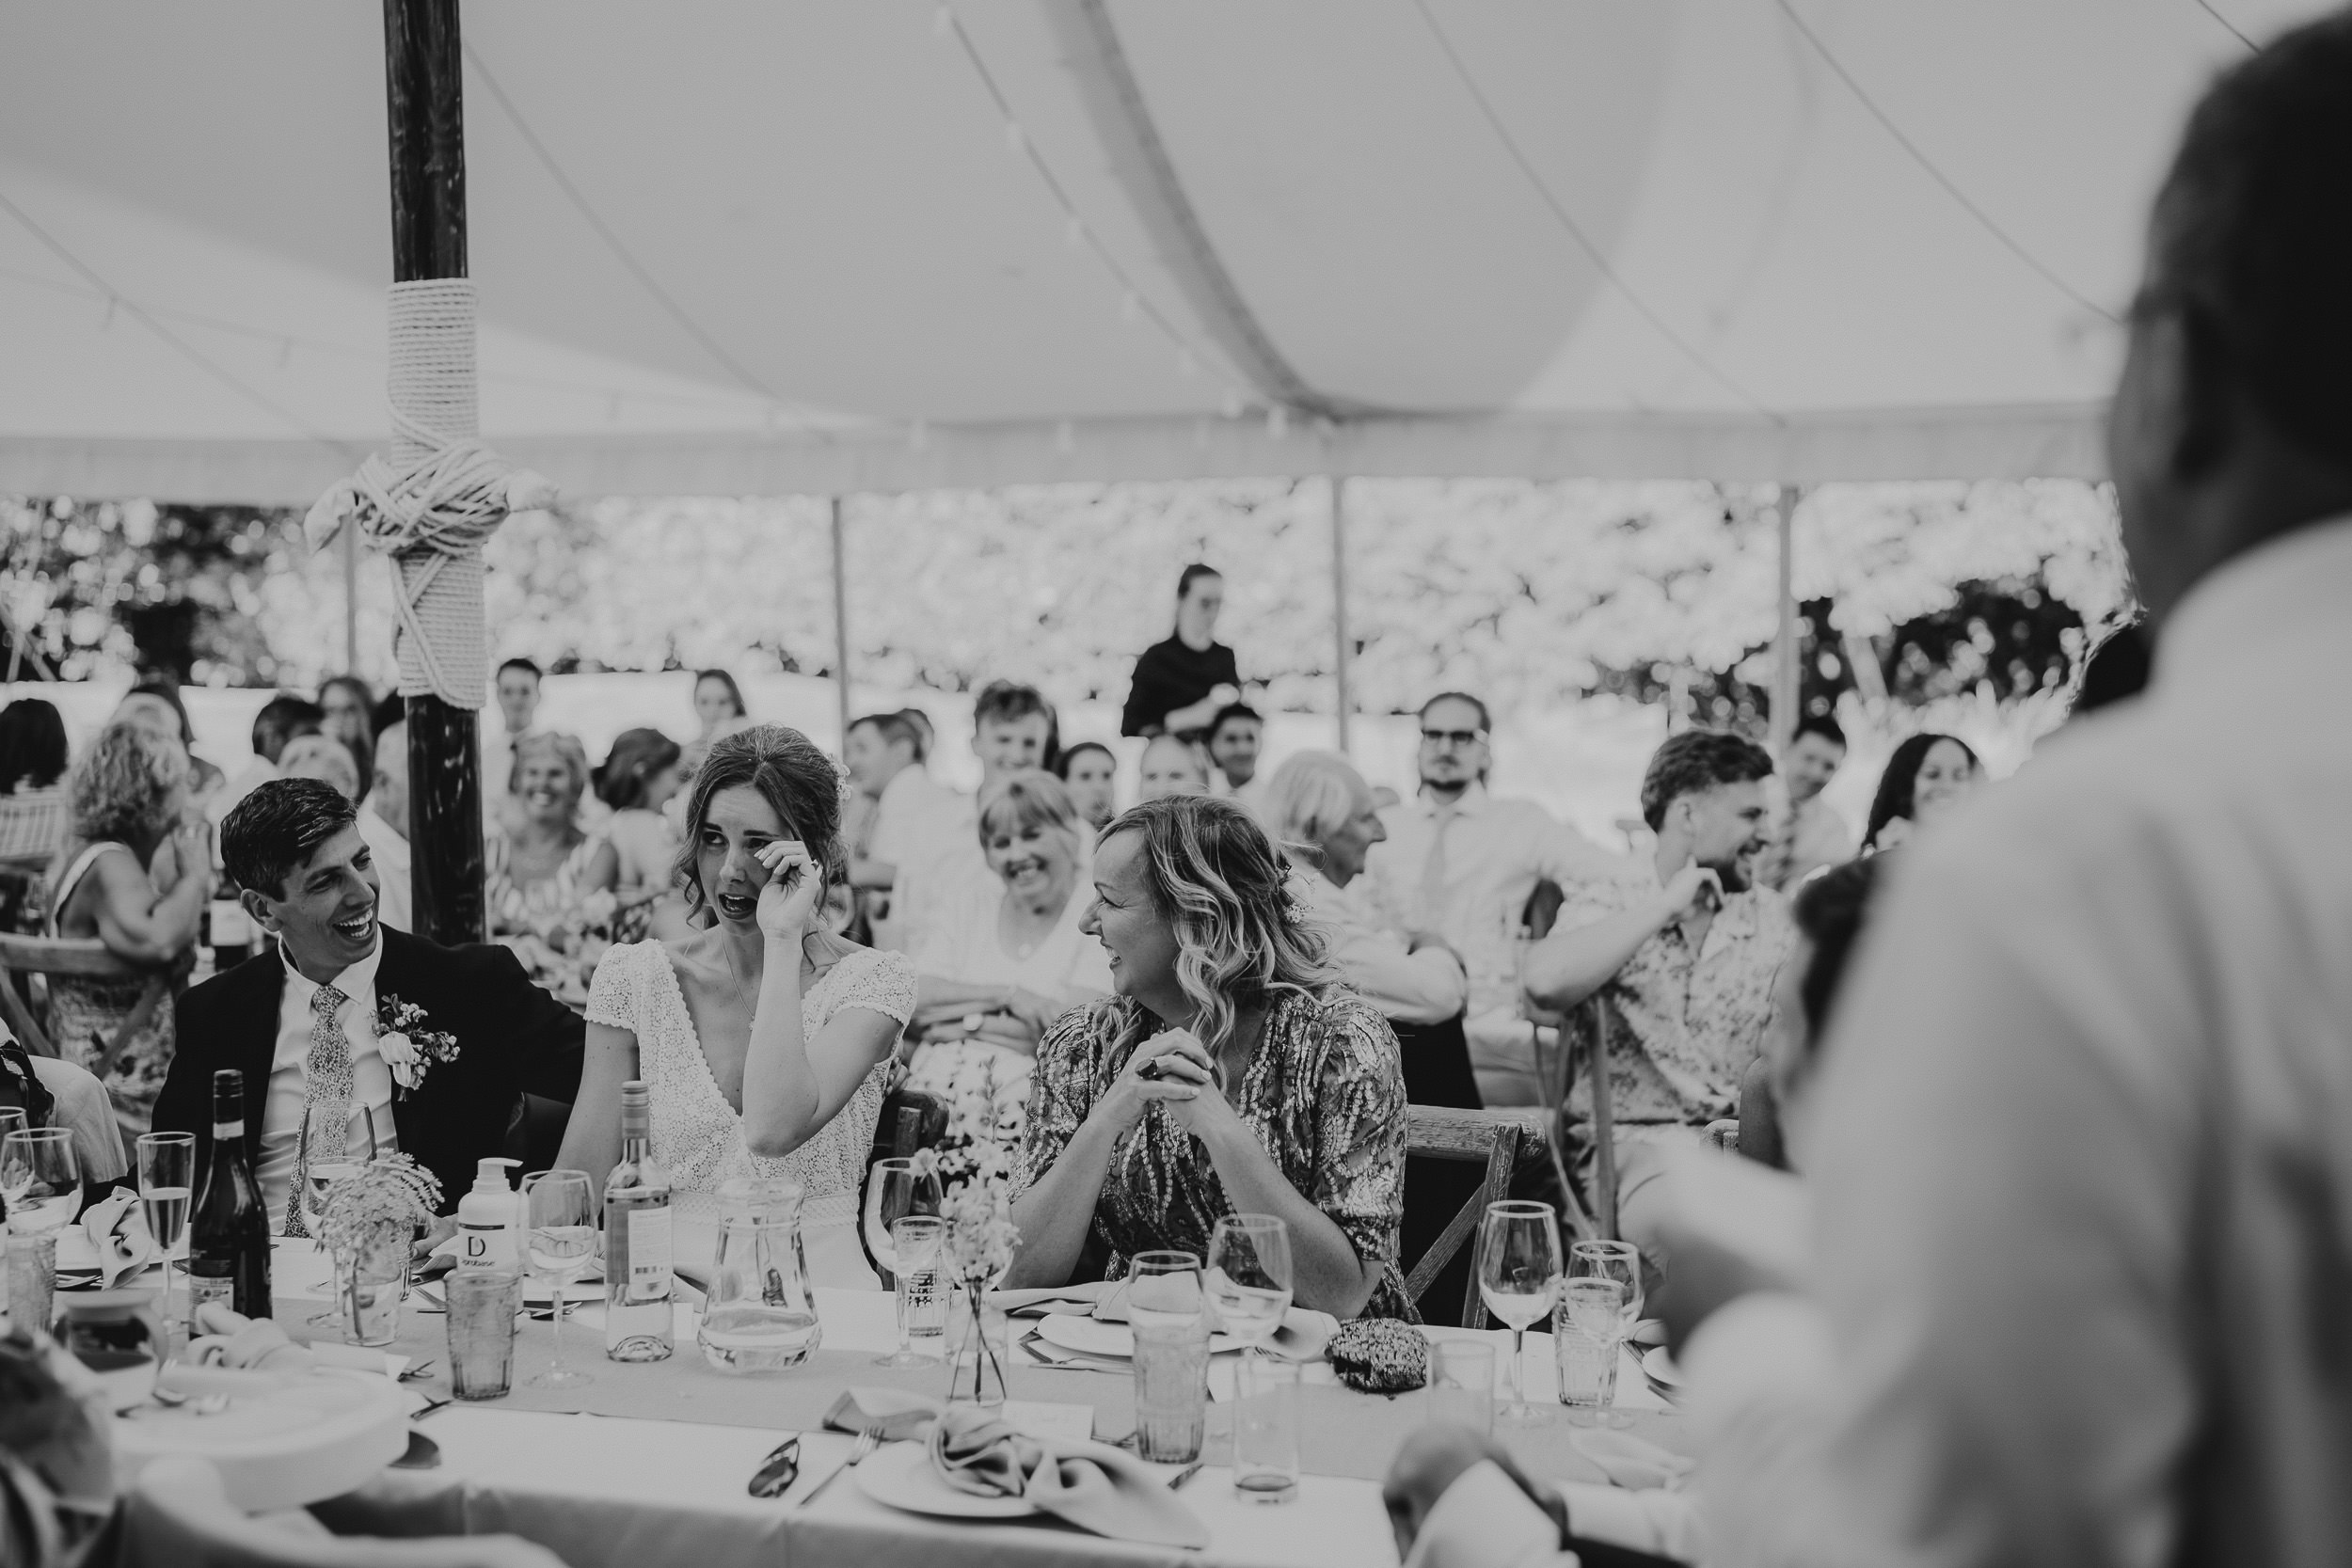 A black and white photo capturing a wedding reception in a tent, taken by a wedding photographer.